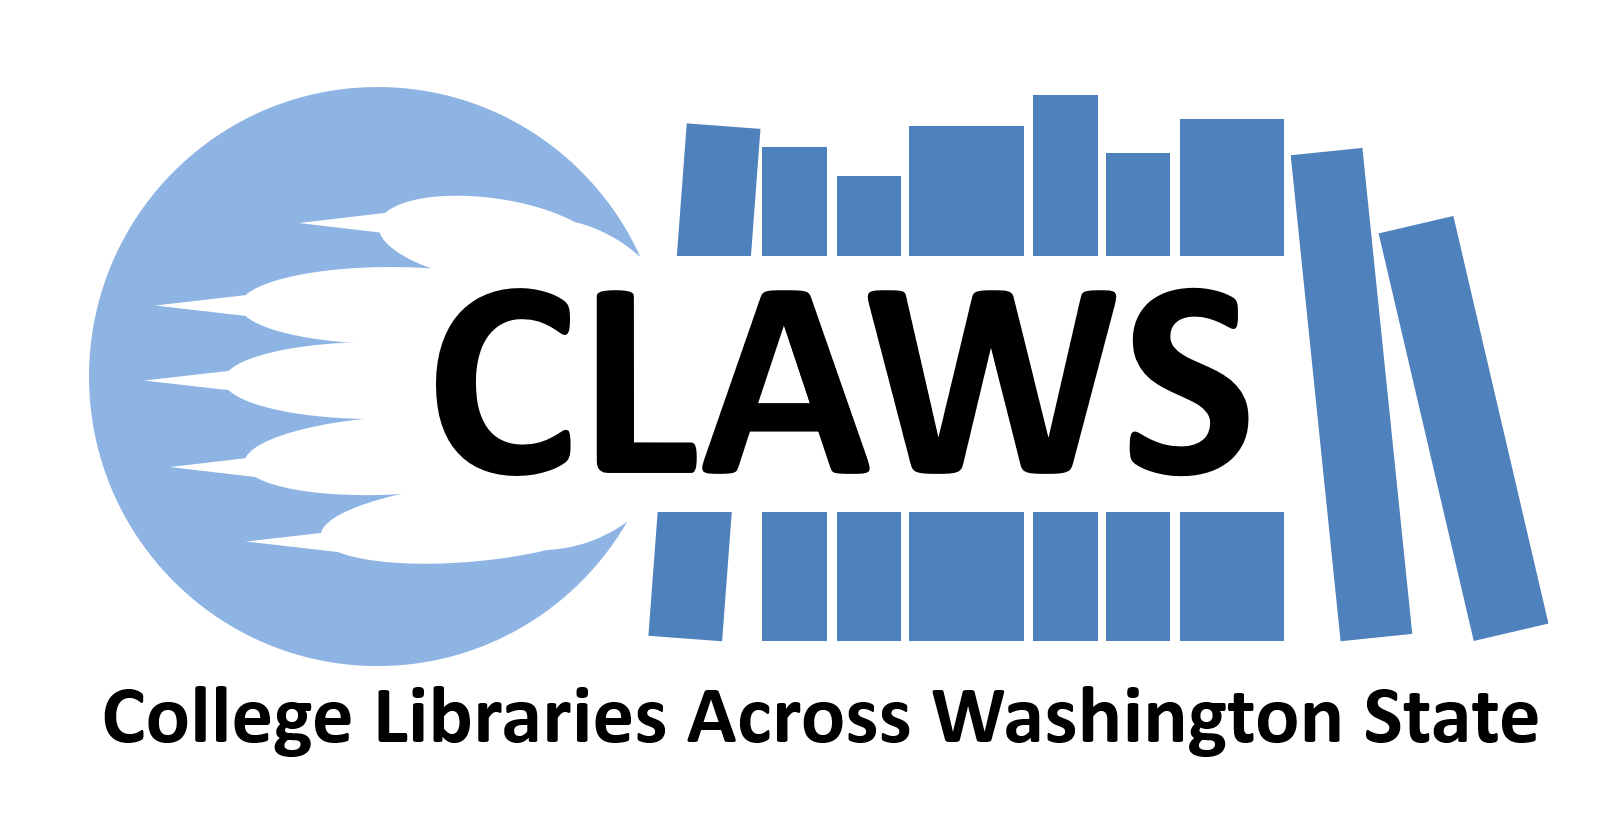 claws logo, a paw across a row of books